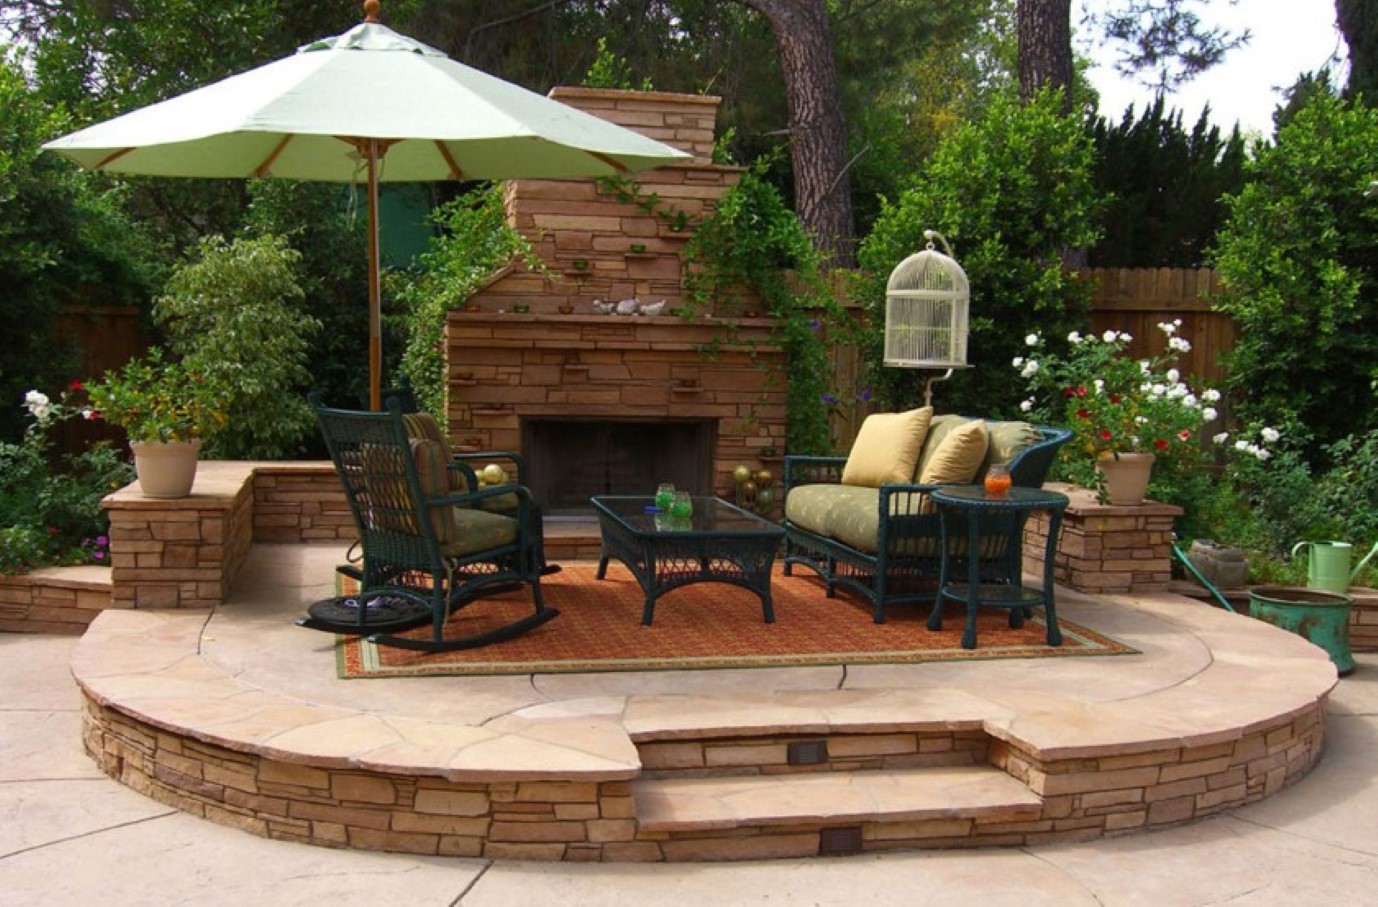 Brick Outdoor Brown Chic Brick Outdoor Fireplace Feat Brown Area Rug And Wicker Rocking Chair Plus Green Umbrella In Stunning Backyard Patio Idea  Decorating Backyard Patio Ideas For Lovely Family And Enhancing Your House Design 